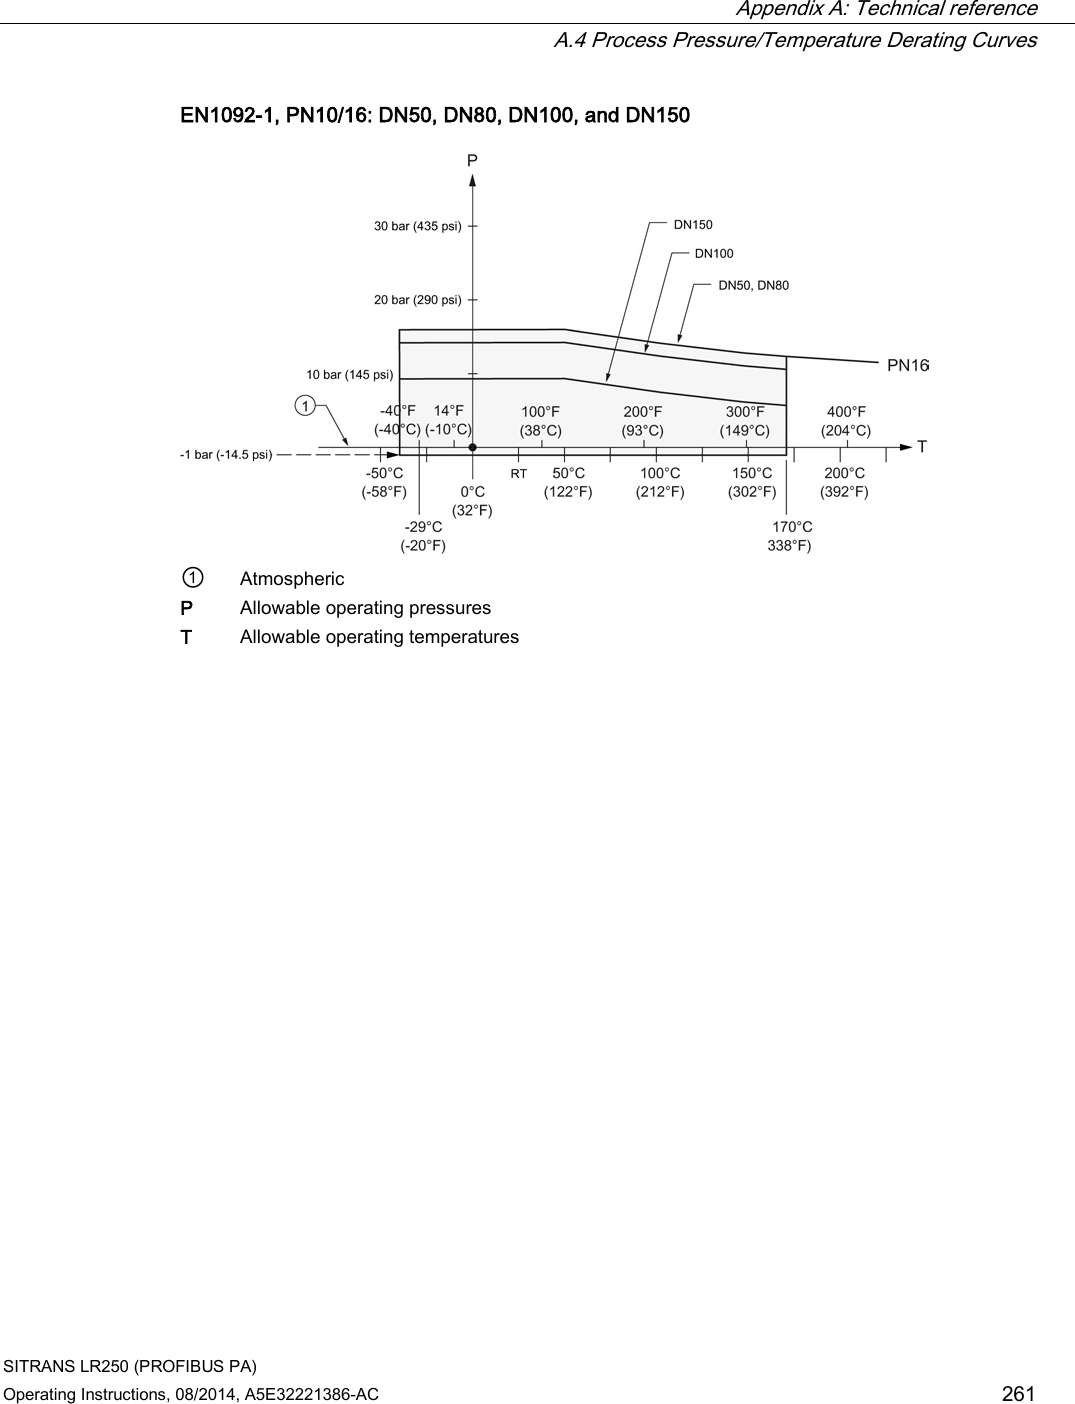  Appendix A: Technical reference  A.4 Process Pressure/Temperature Derating Curves SITRANS LR250 (PROFIBUS PA) Operating Instructions, 08/2014, A5E32221386-AC 261 EN1092-1, PN10/16: DN50, DN80, DN100, and DN150  ① Atmospheric P Allowable operating pressures T Allowable operating temperatures 